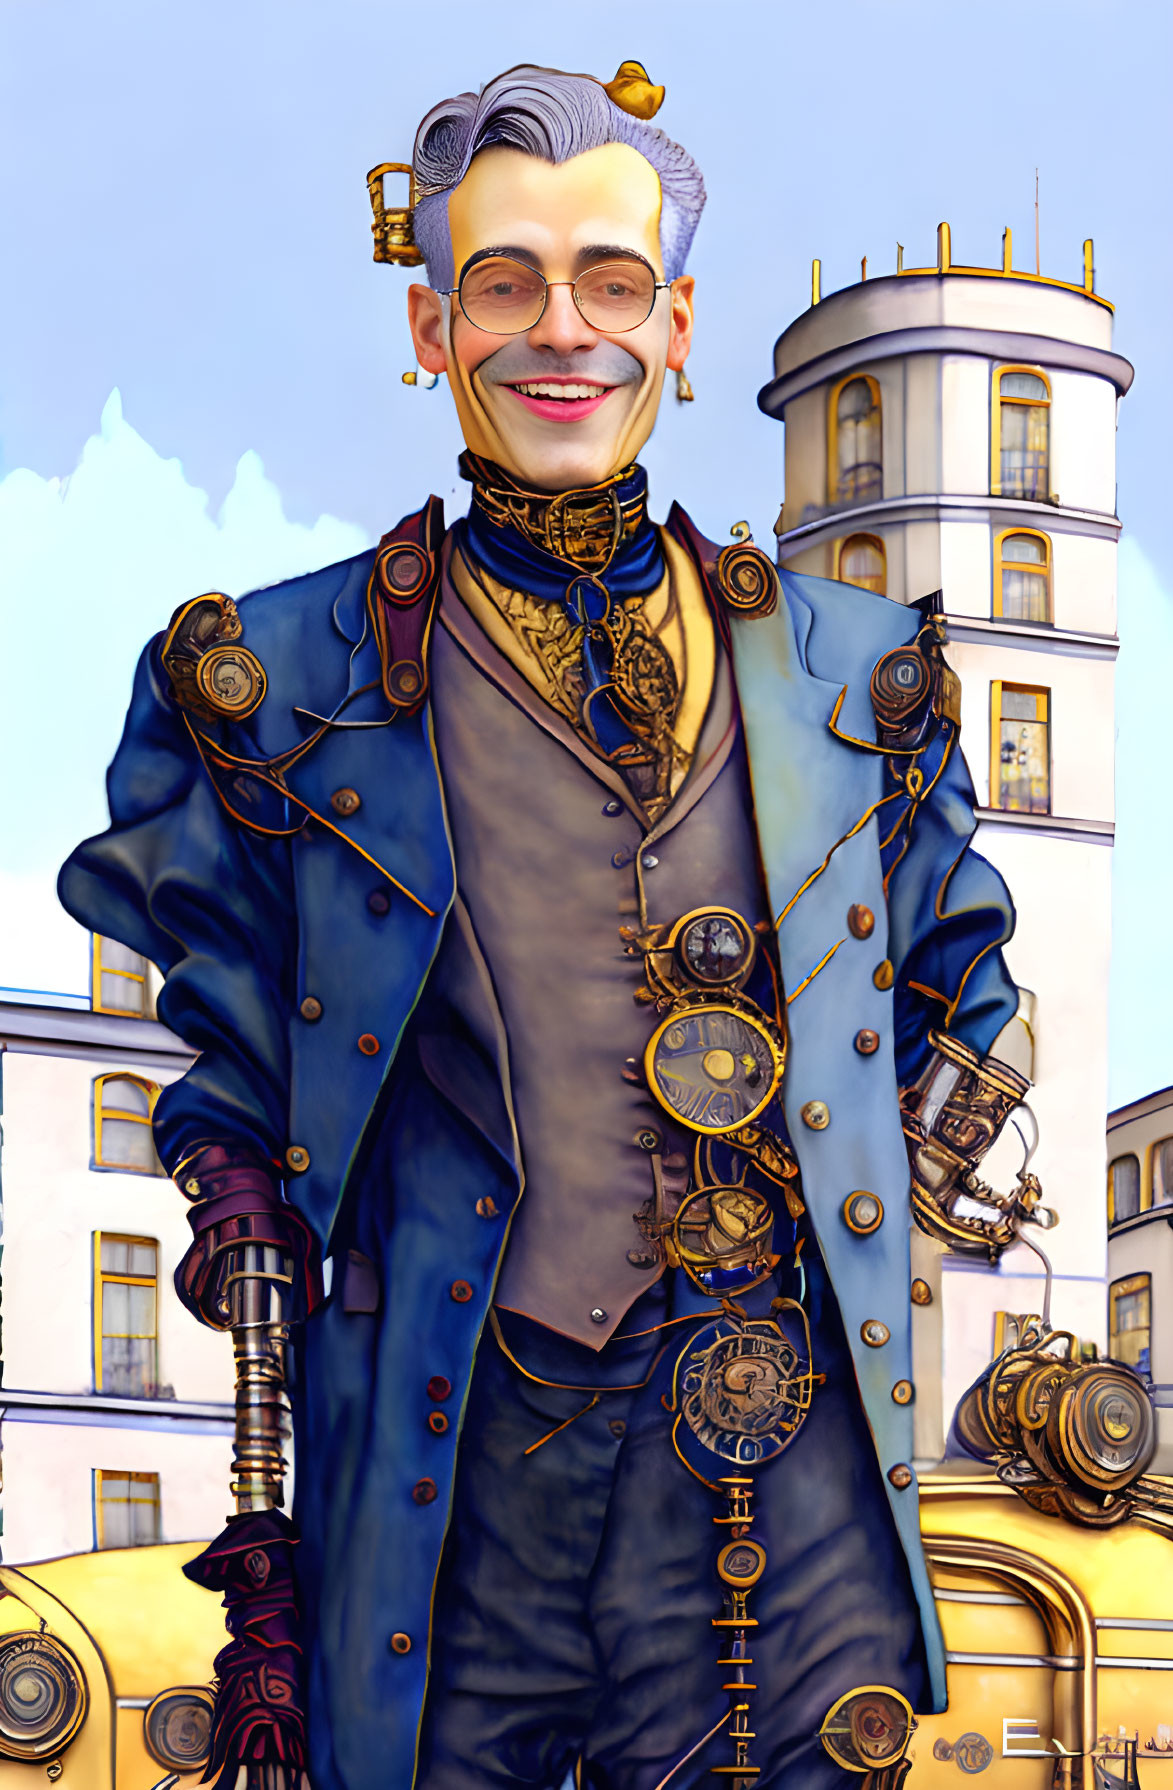 Steampunk-themed illustration of a man in intricate outfit with mechanical details.